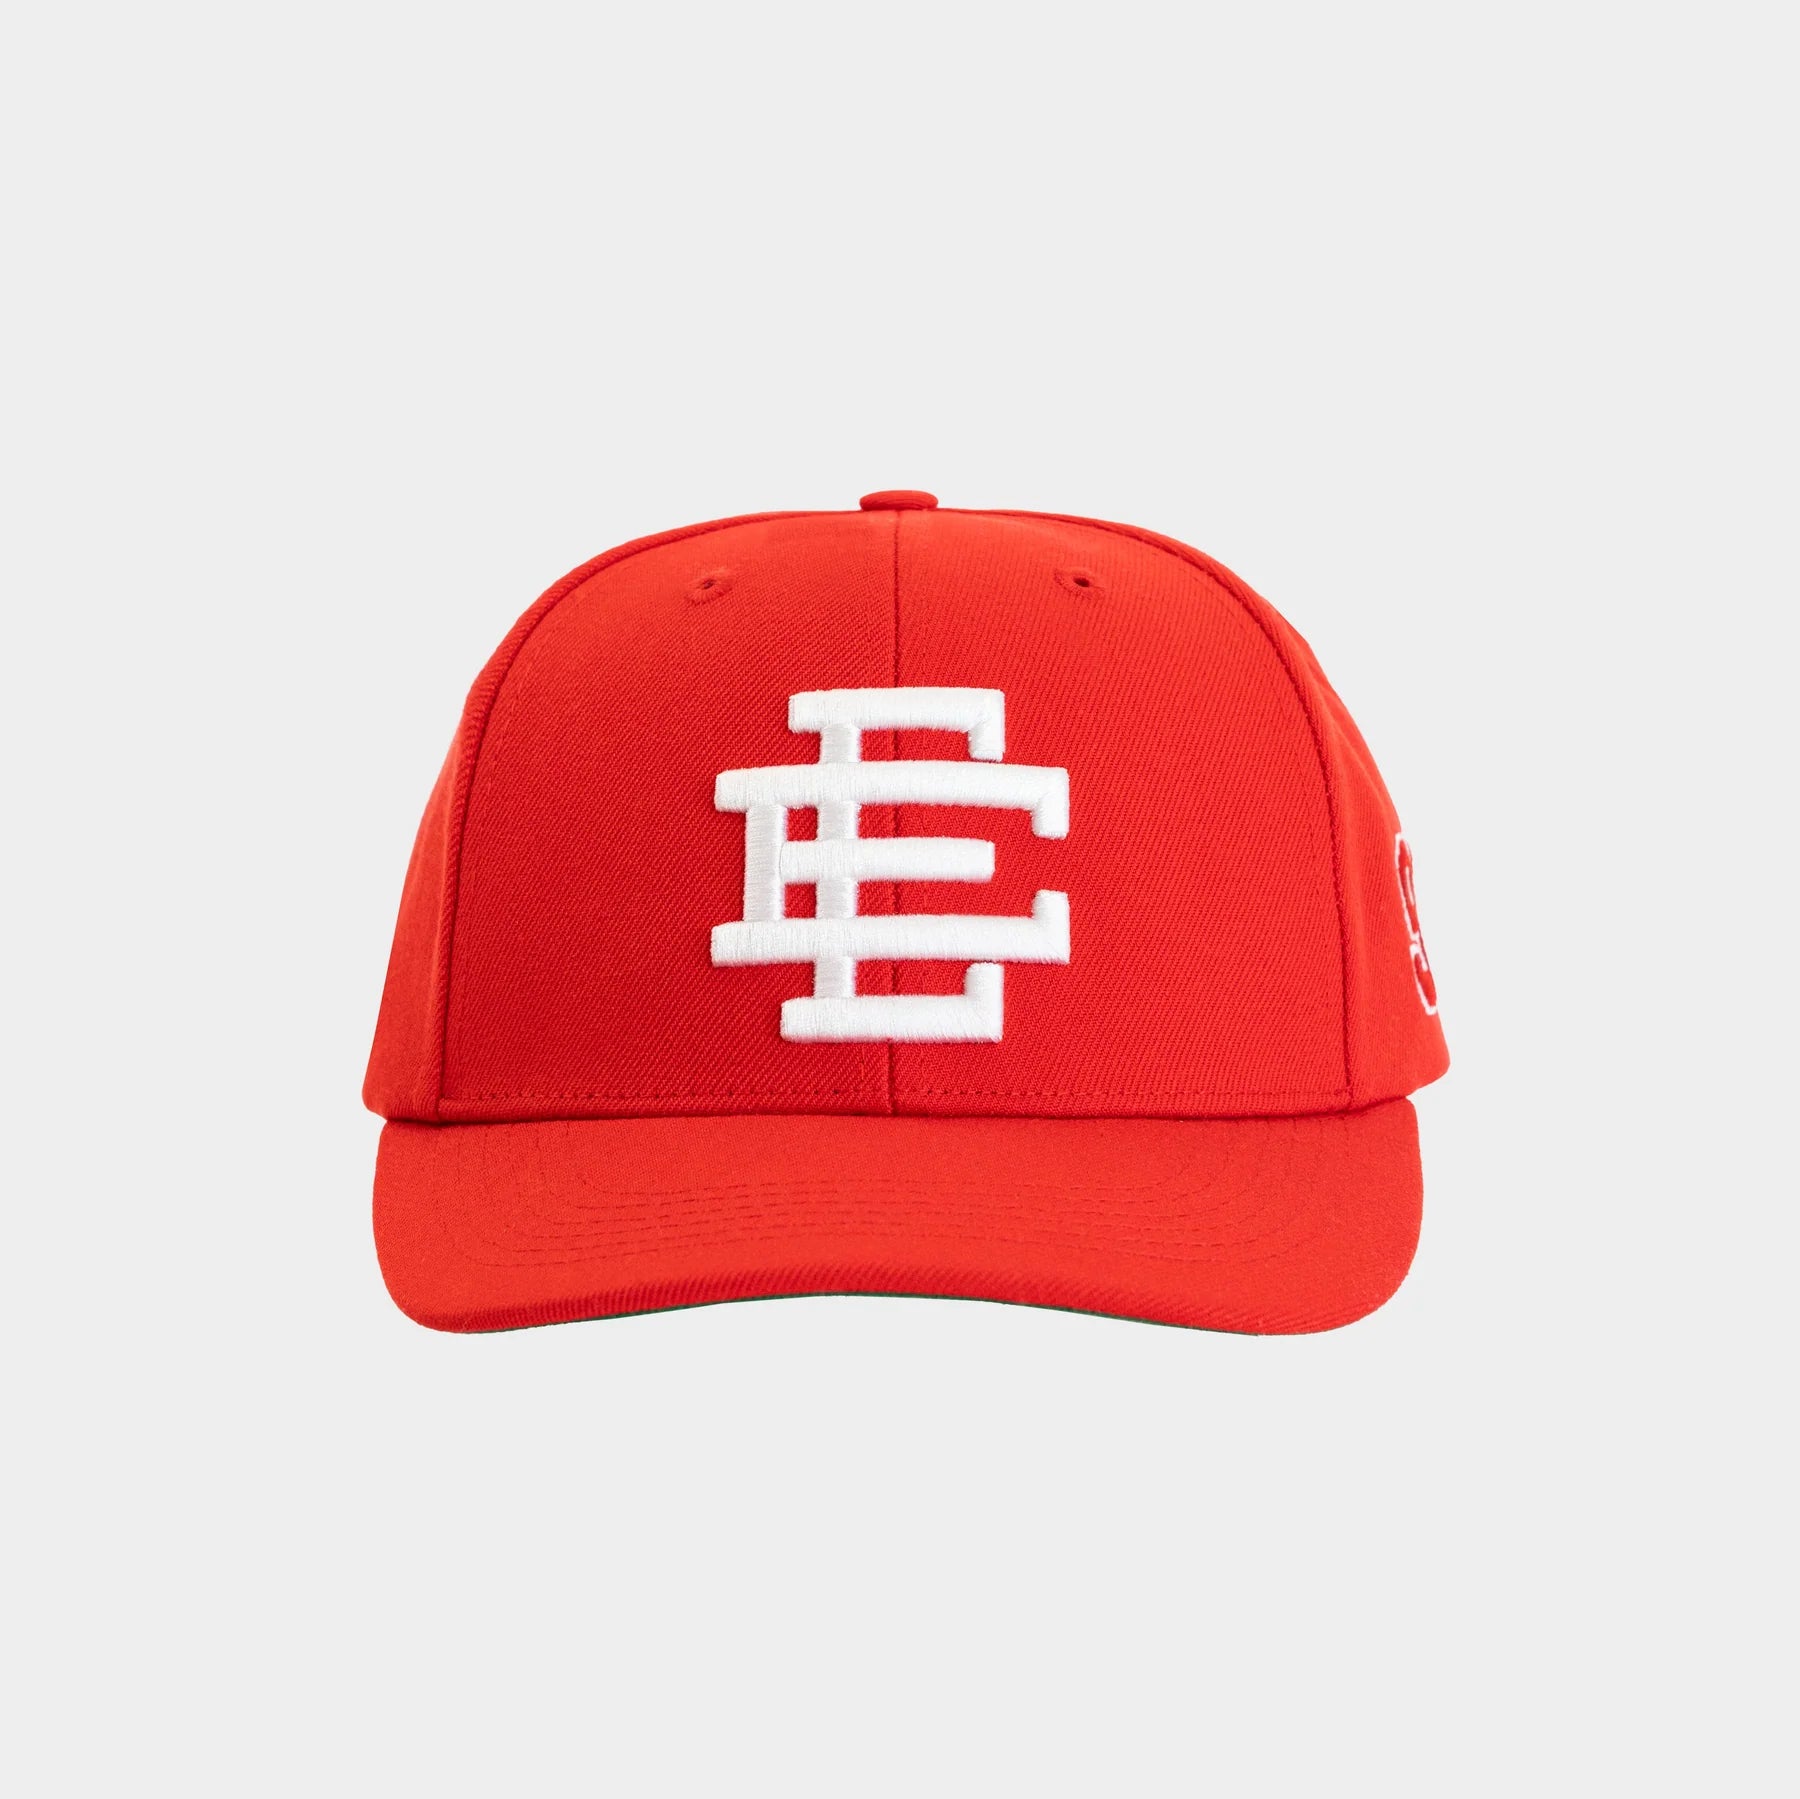 Eric Emanuel Red Basic Snapback Hat Front View